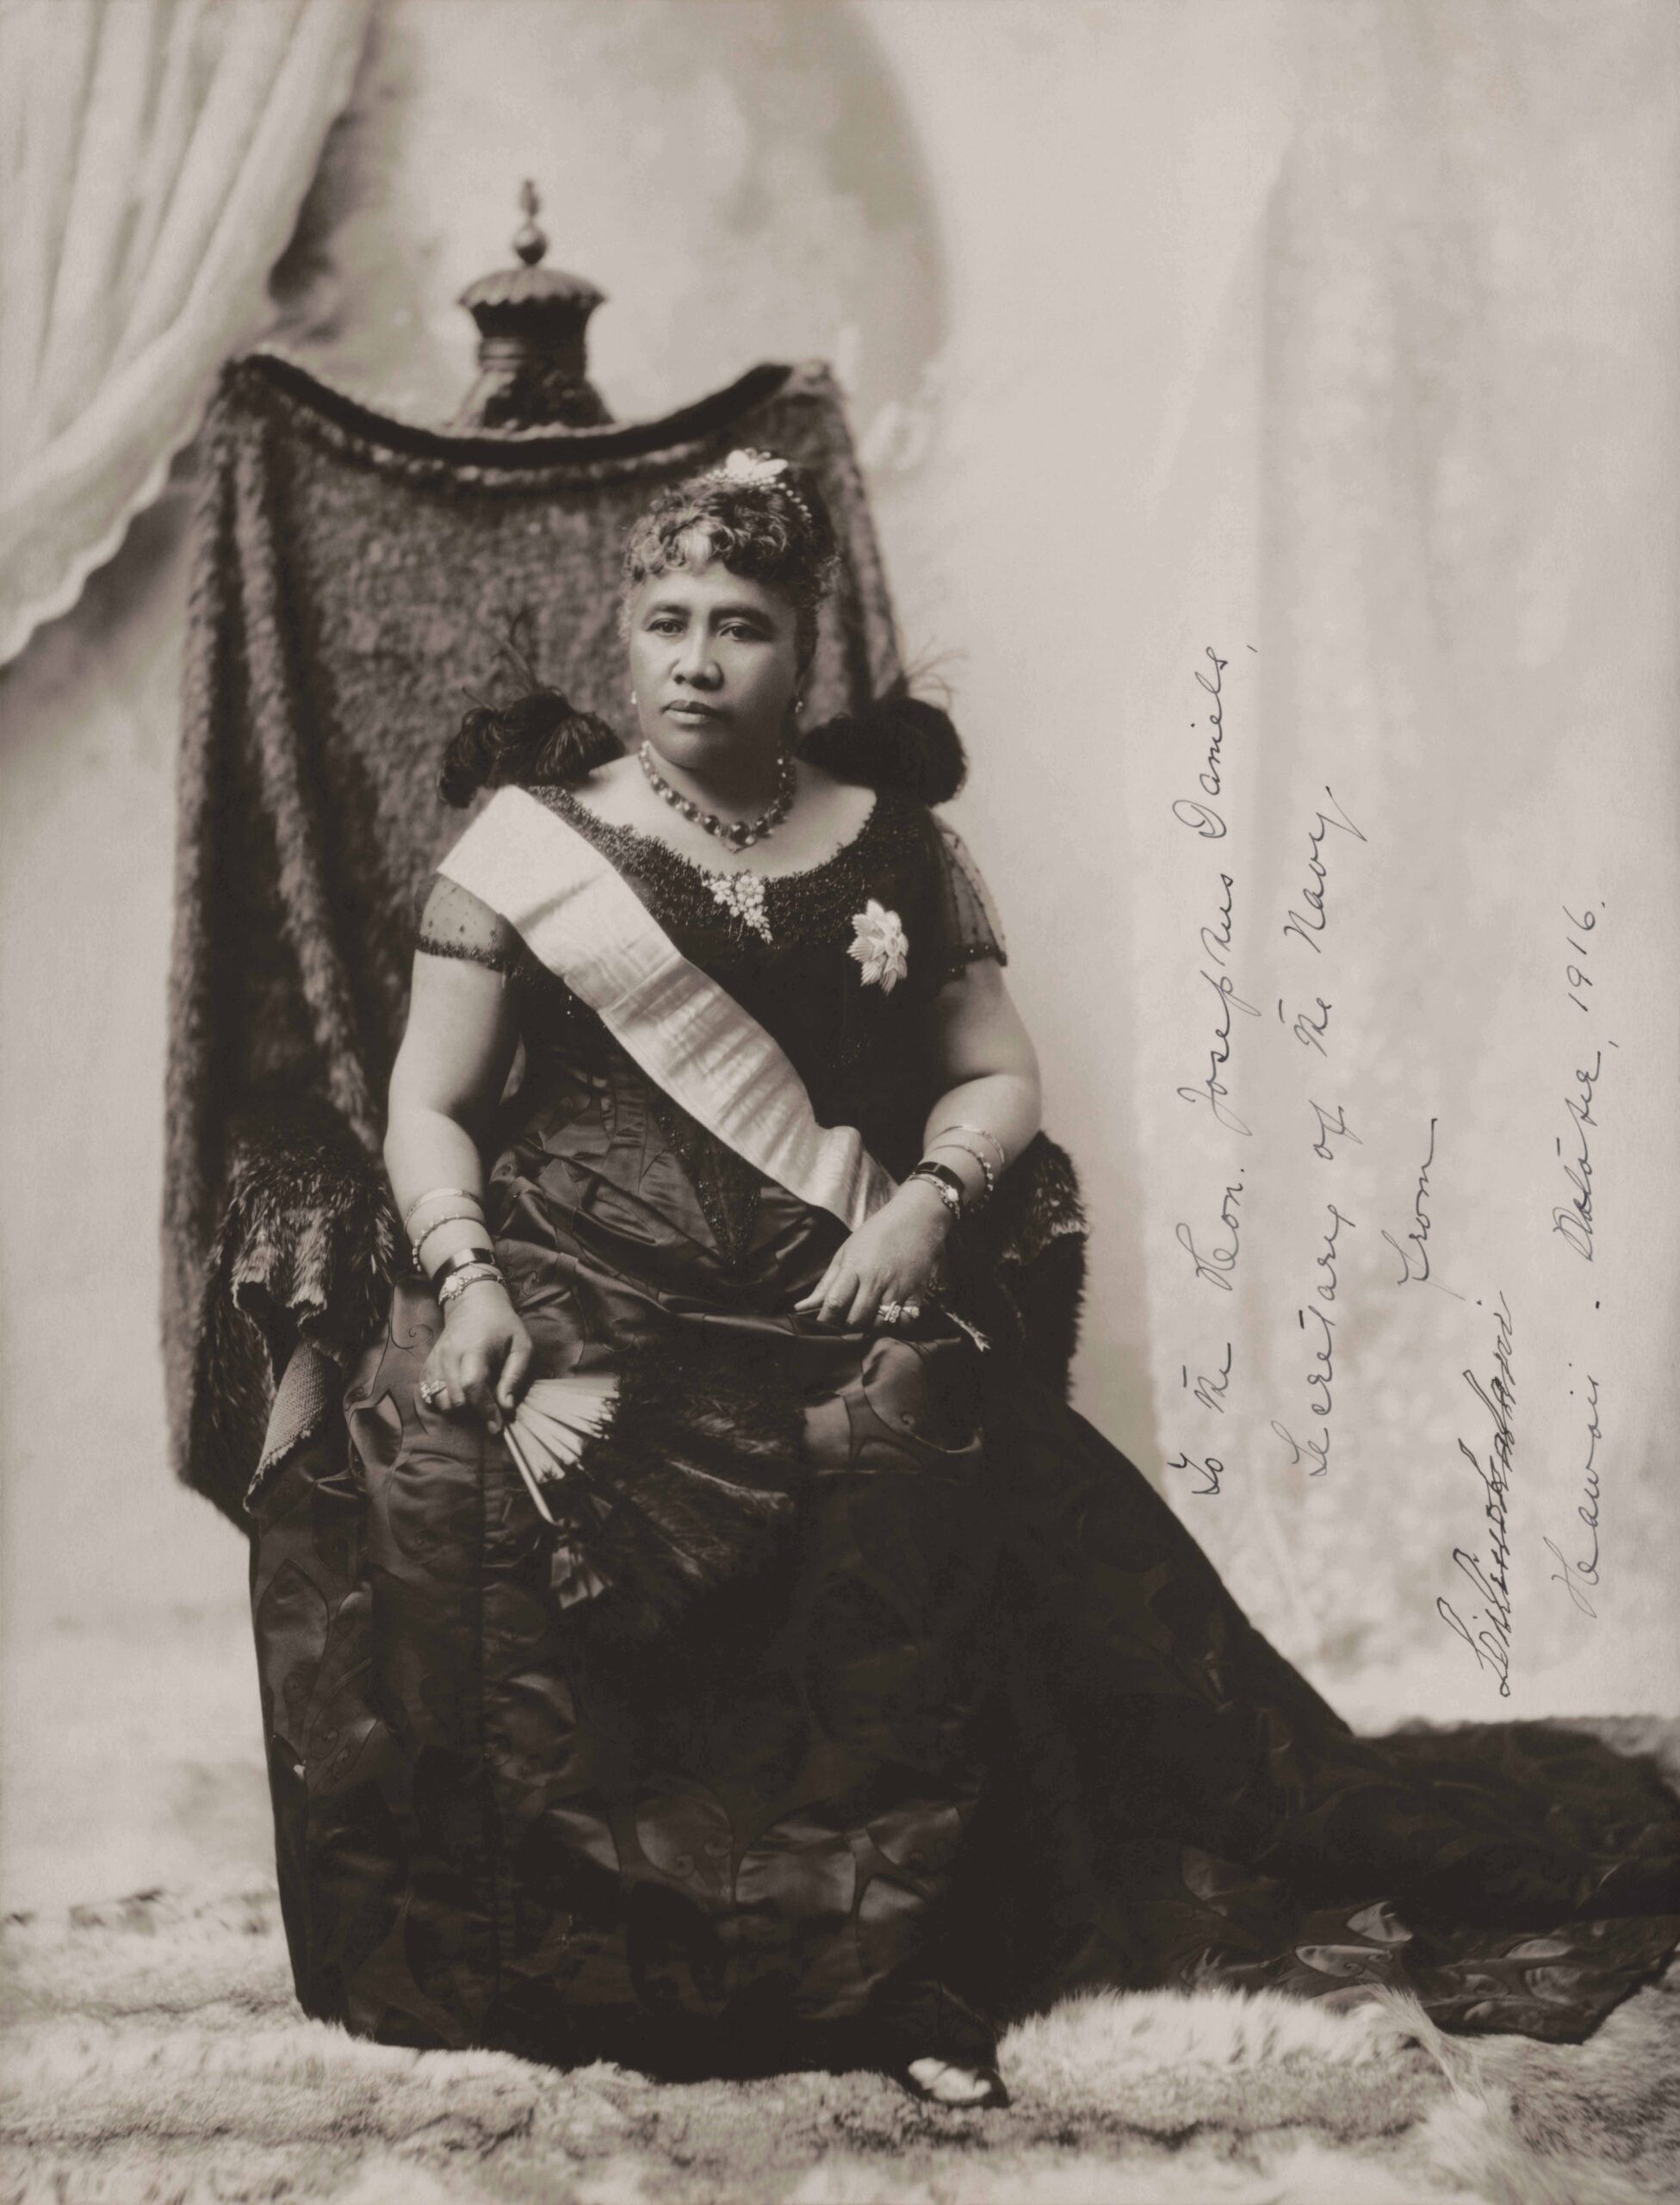 The Reign of Royalty: Uncovering the Queen of Set in 19th Century California